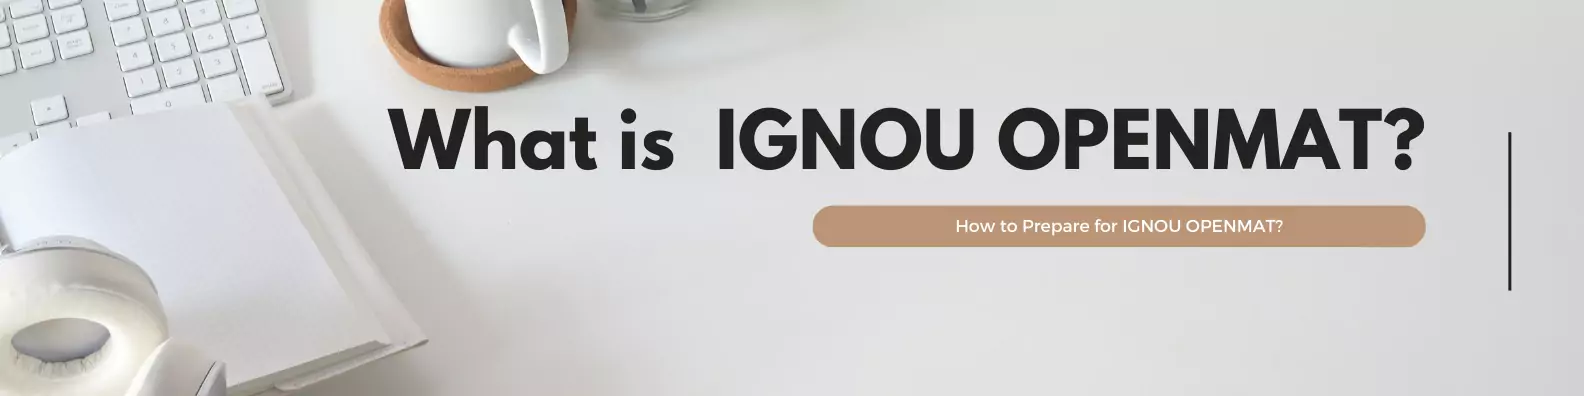 What Is IGNOU OPENMAT – Eligibility, Fees, Courses